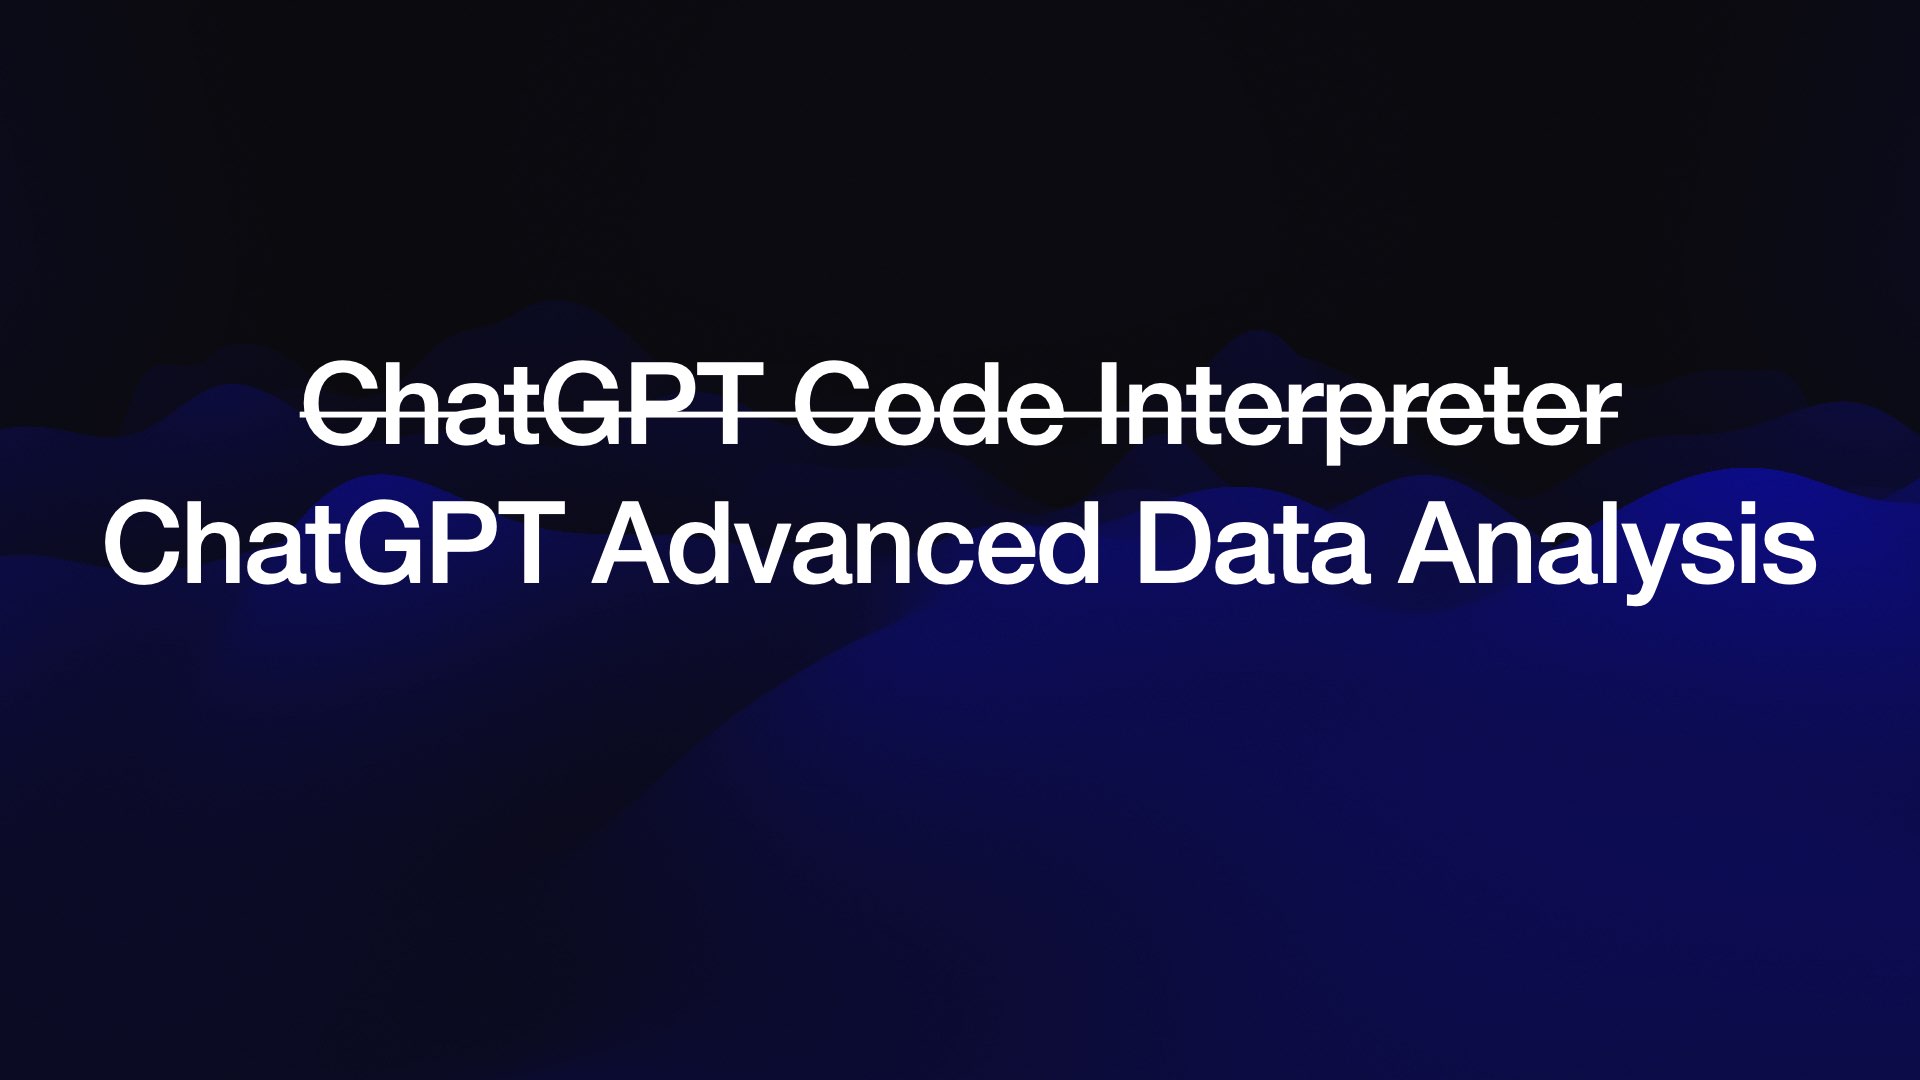 Crossed out: ChatGPT Code Interpreter ChatGPT Advanced Data Analysis